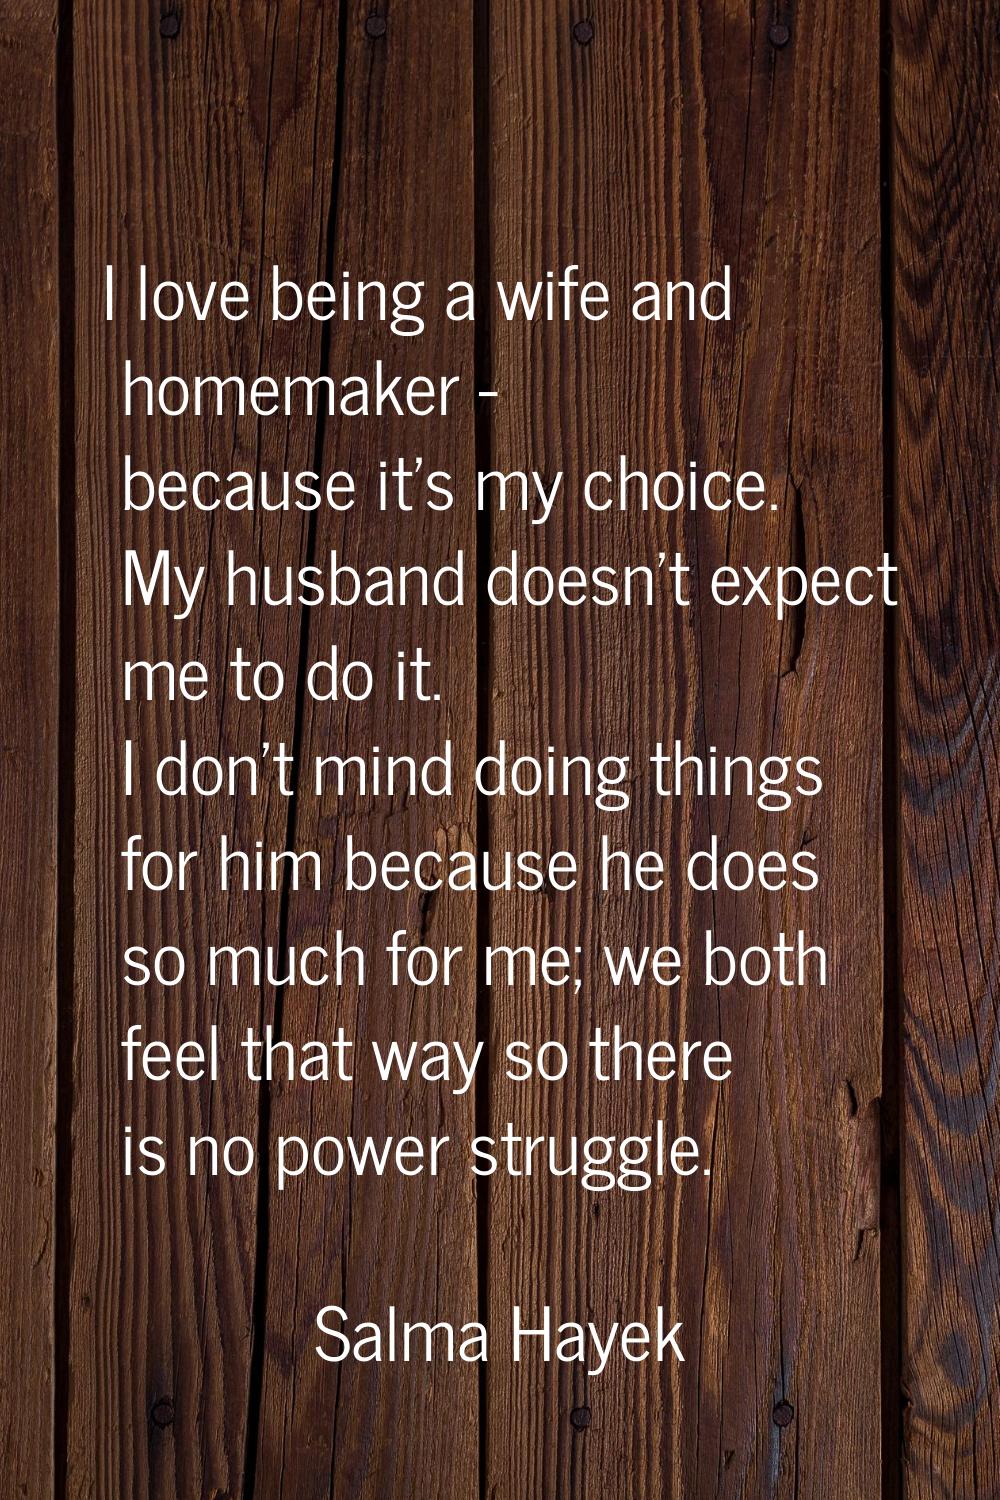 I love being a wife and homemaker - because it's my choice. My husband doesn't expect me to do it. 